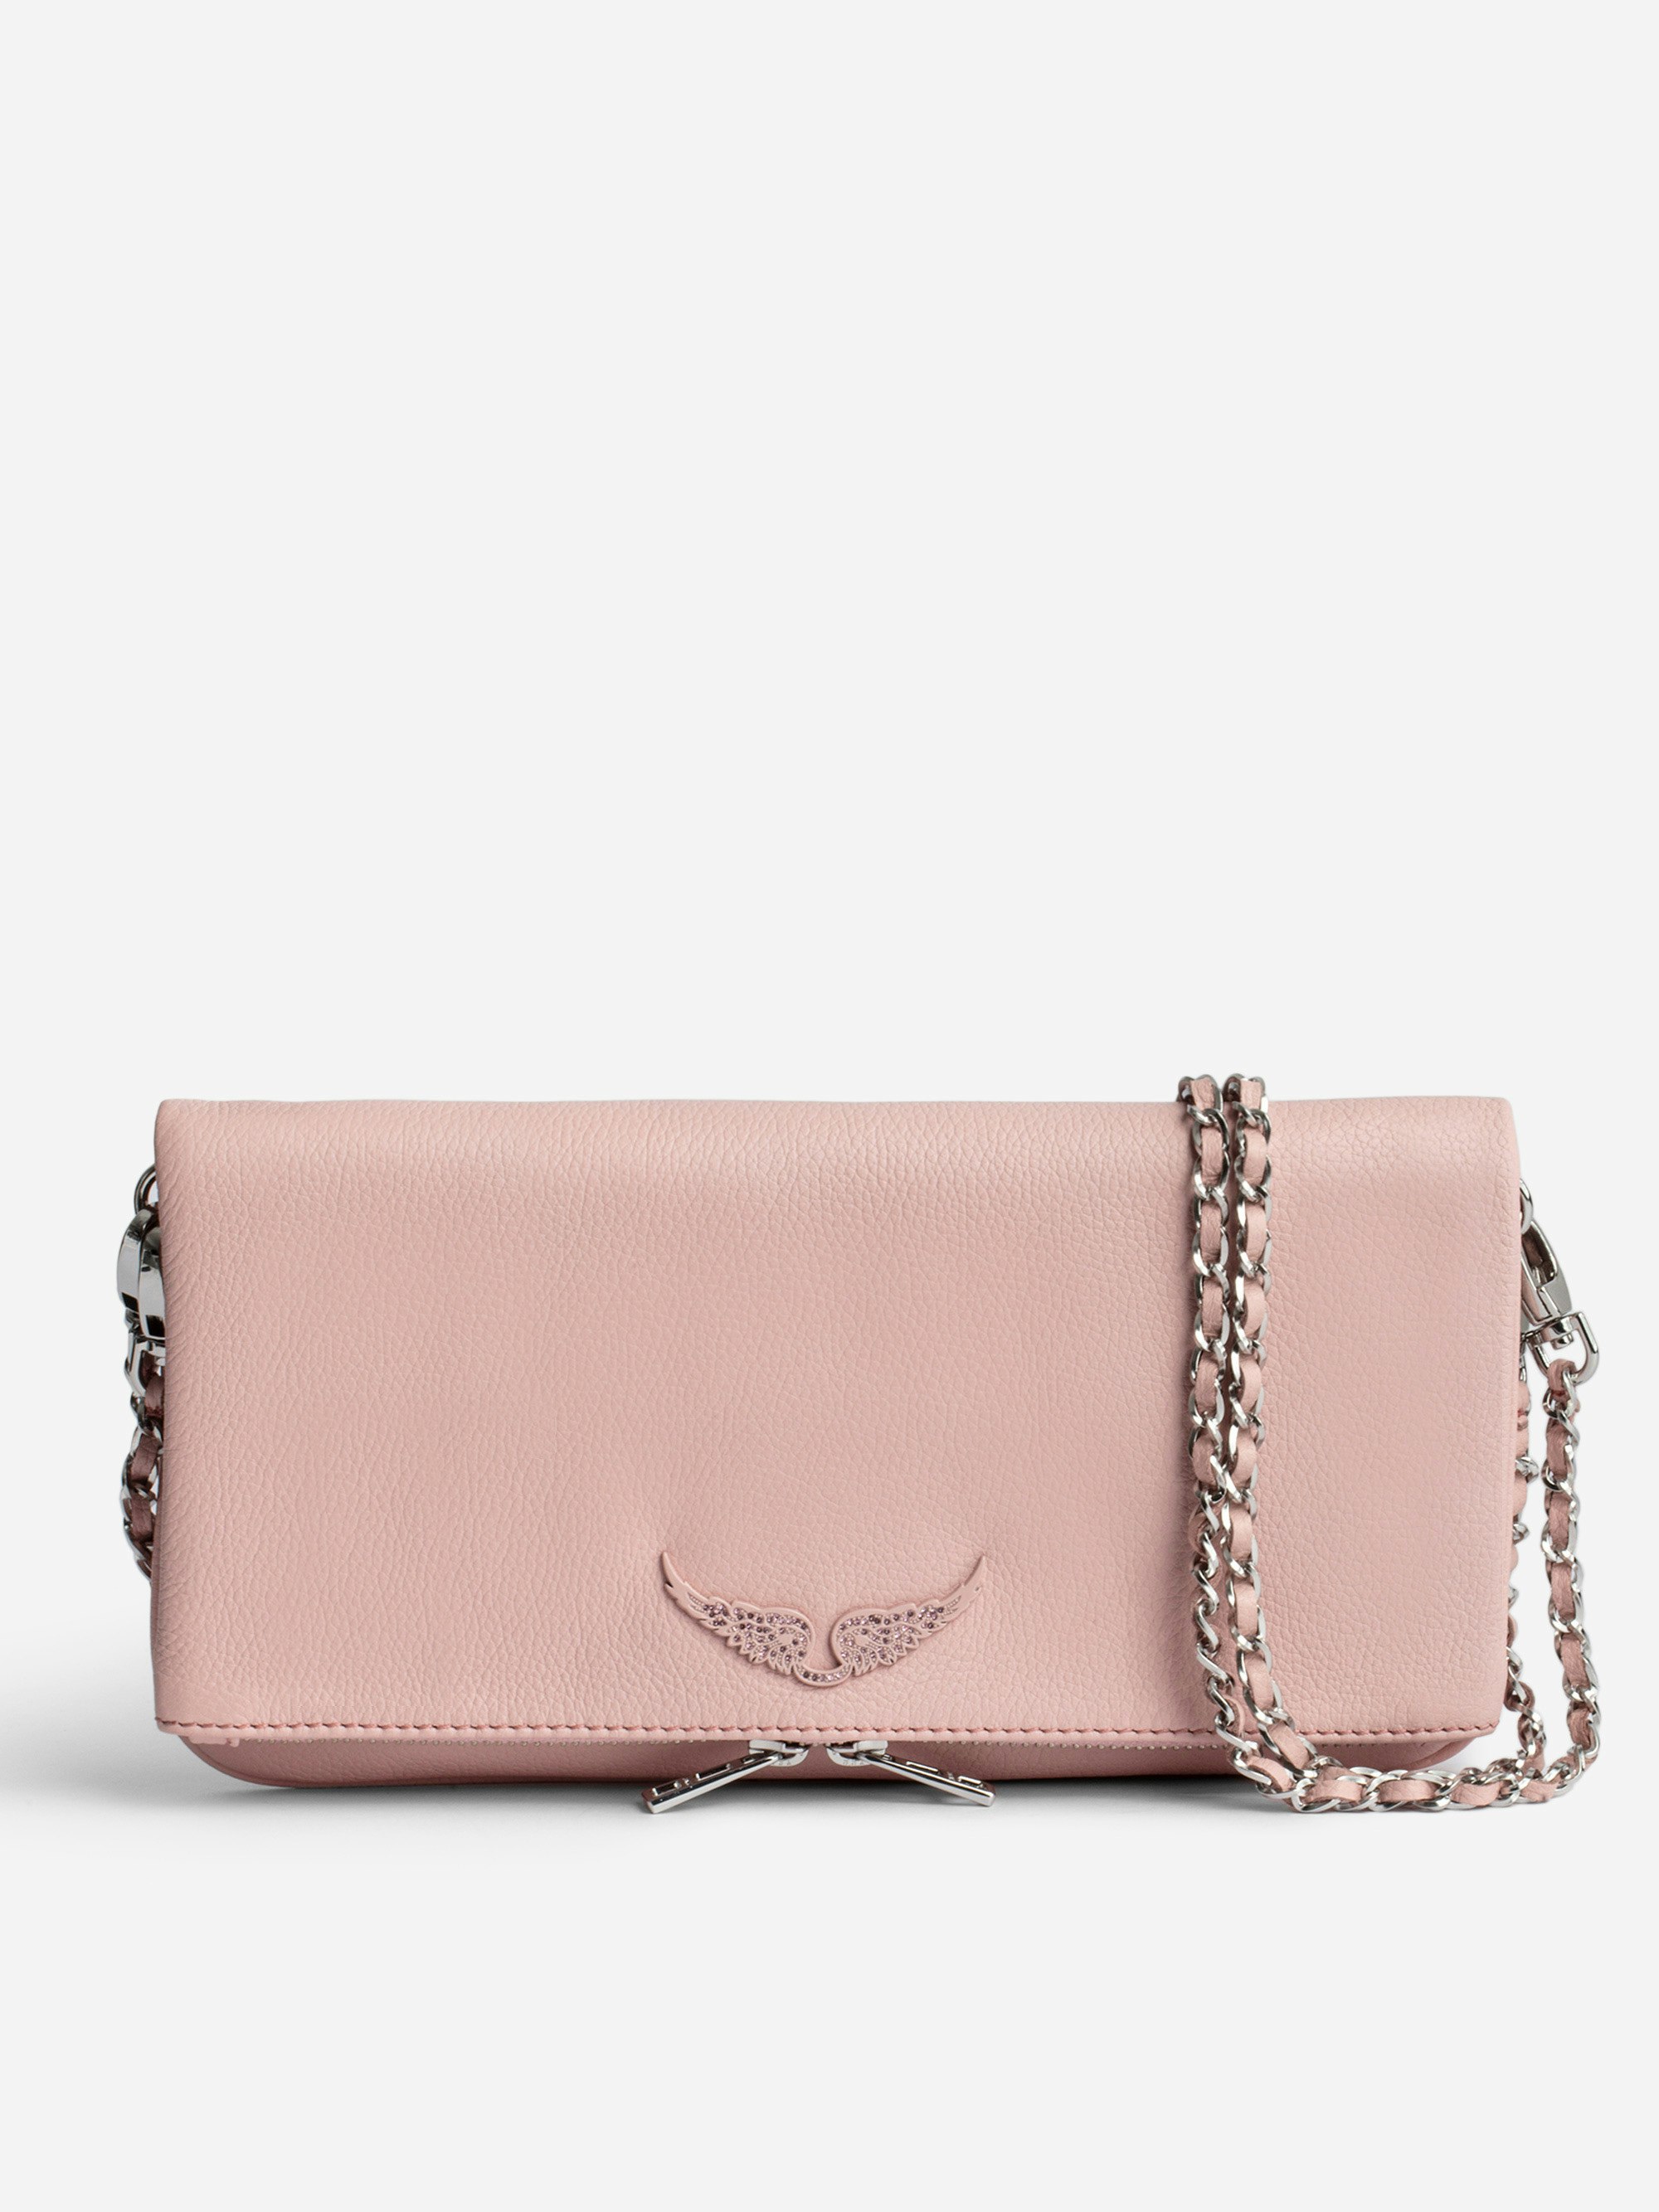 Rock Clutch - Women’s light pink grained leather clutch bag with double leather and metal chain strap.